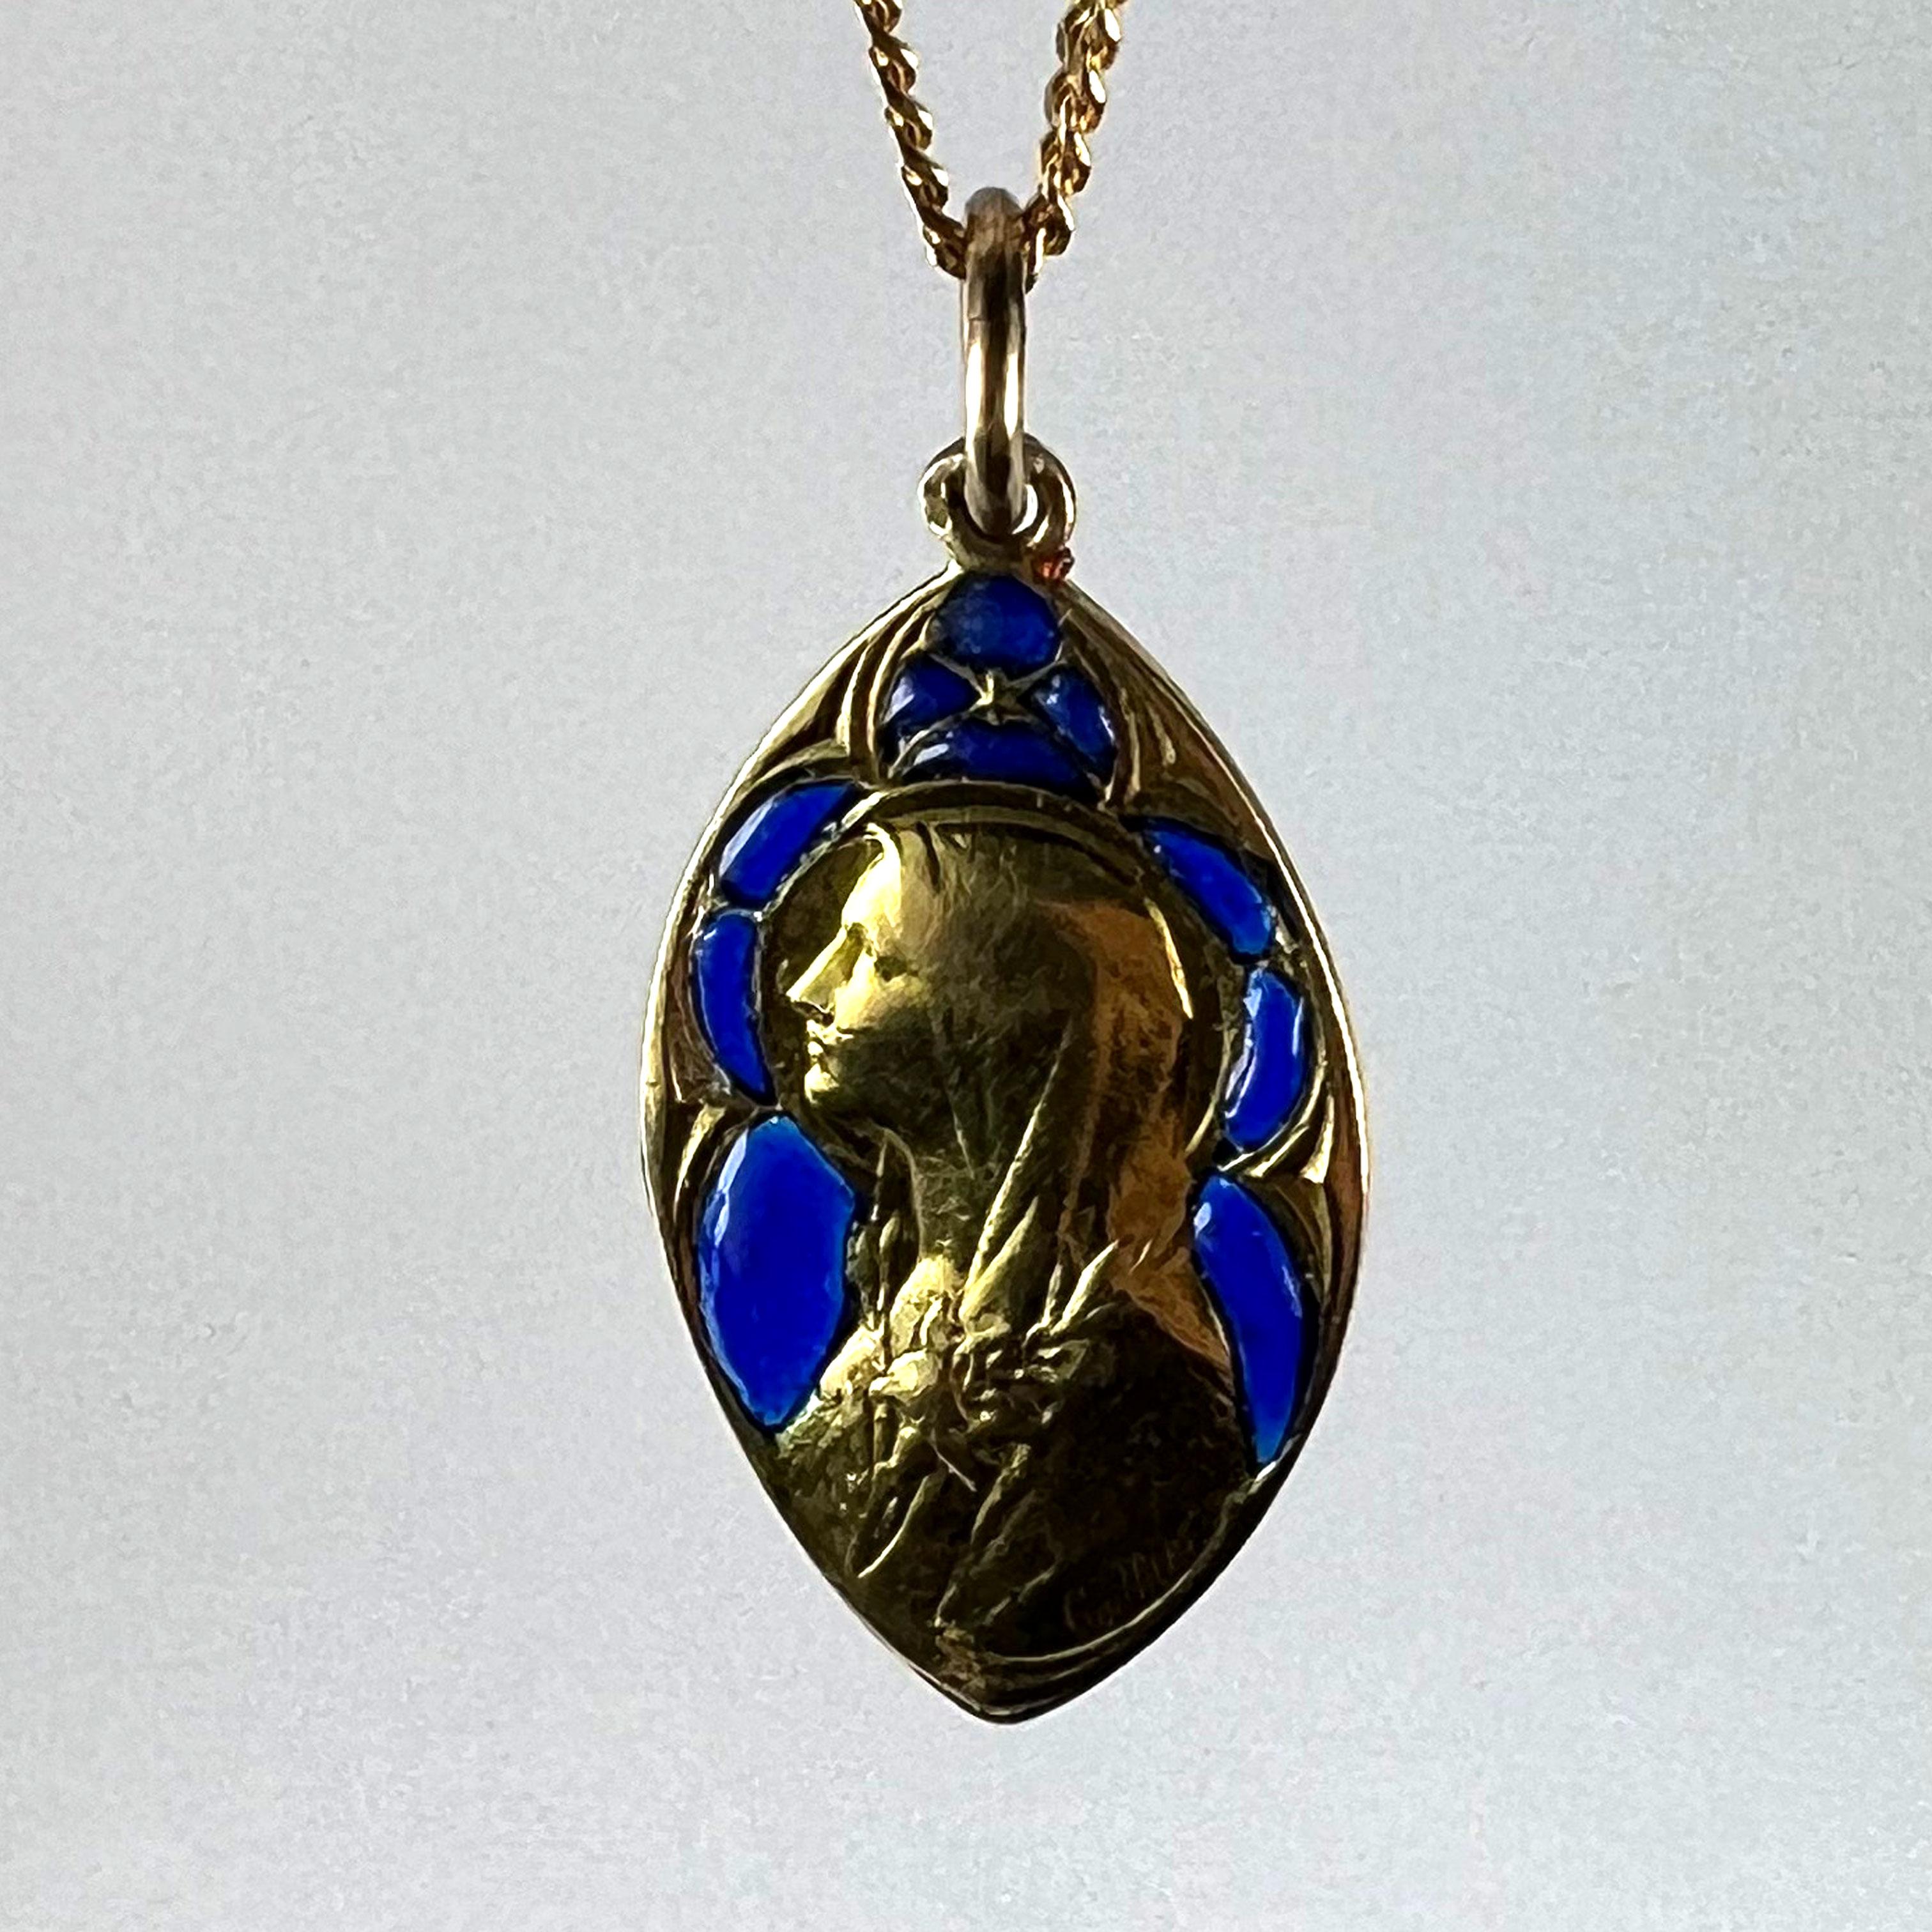 French Guilbert Virgin Mary Plique A Jour Enamel 18K Yellow Gold Pendant Medal For Sale 10